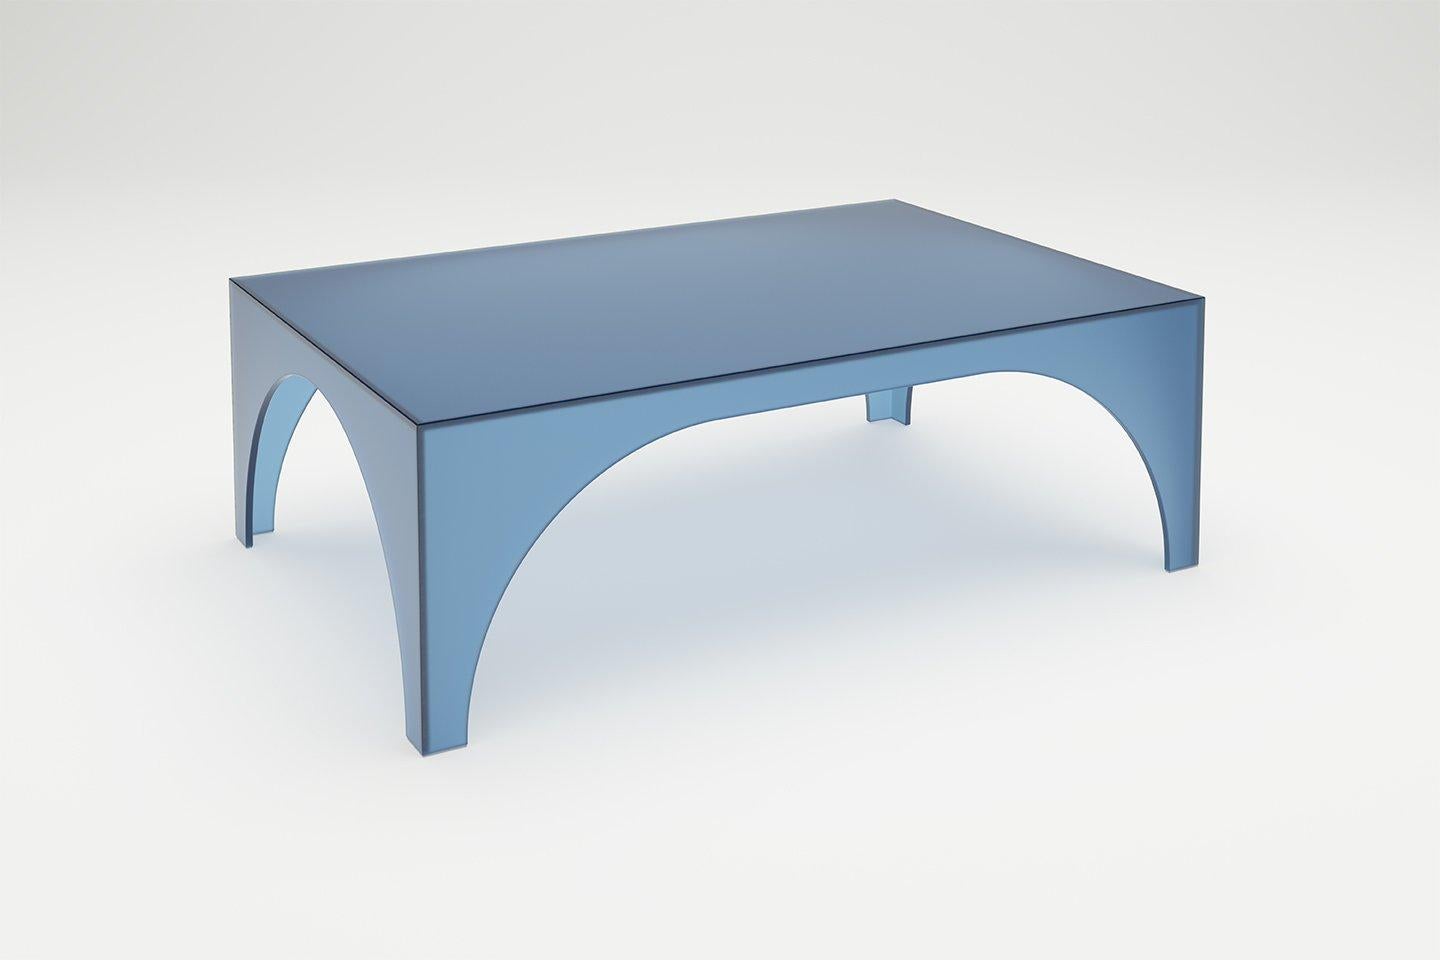 Satin glass black arc oblong coffee table by Sebastian Scherer
Material: satin glass
Also available in glass, clear glass, marble.
Dimensions: 105 x 70 x 35 cm
Colour: black
Also available in green, bronze, blue, white. 

The Arc series is